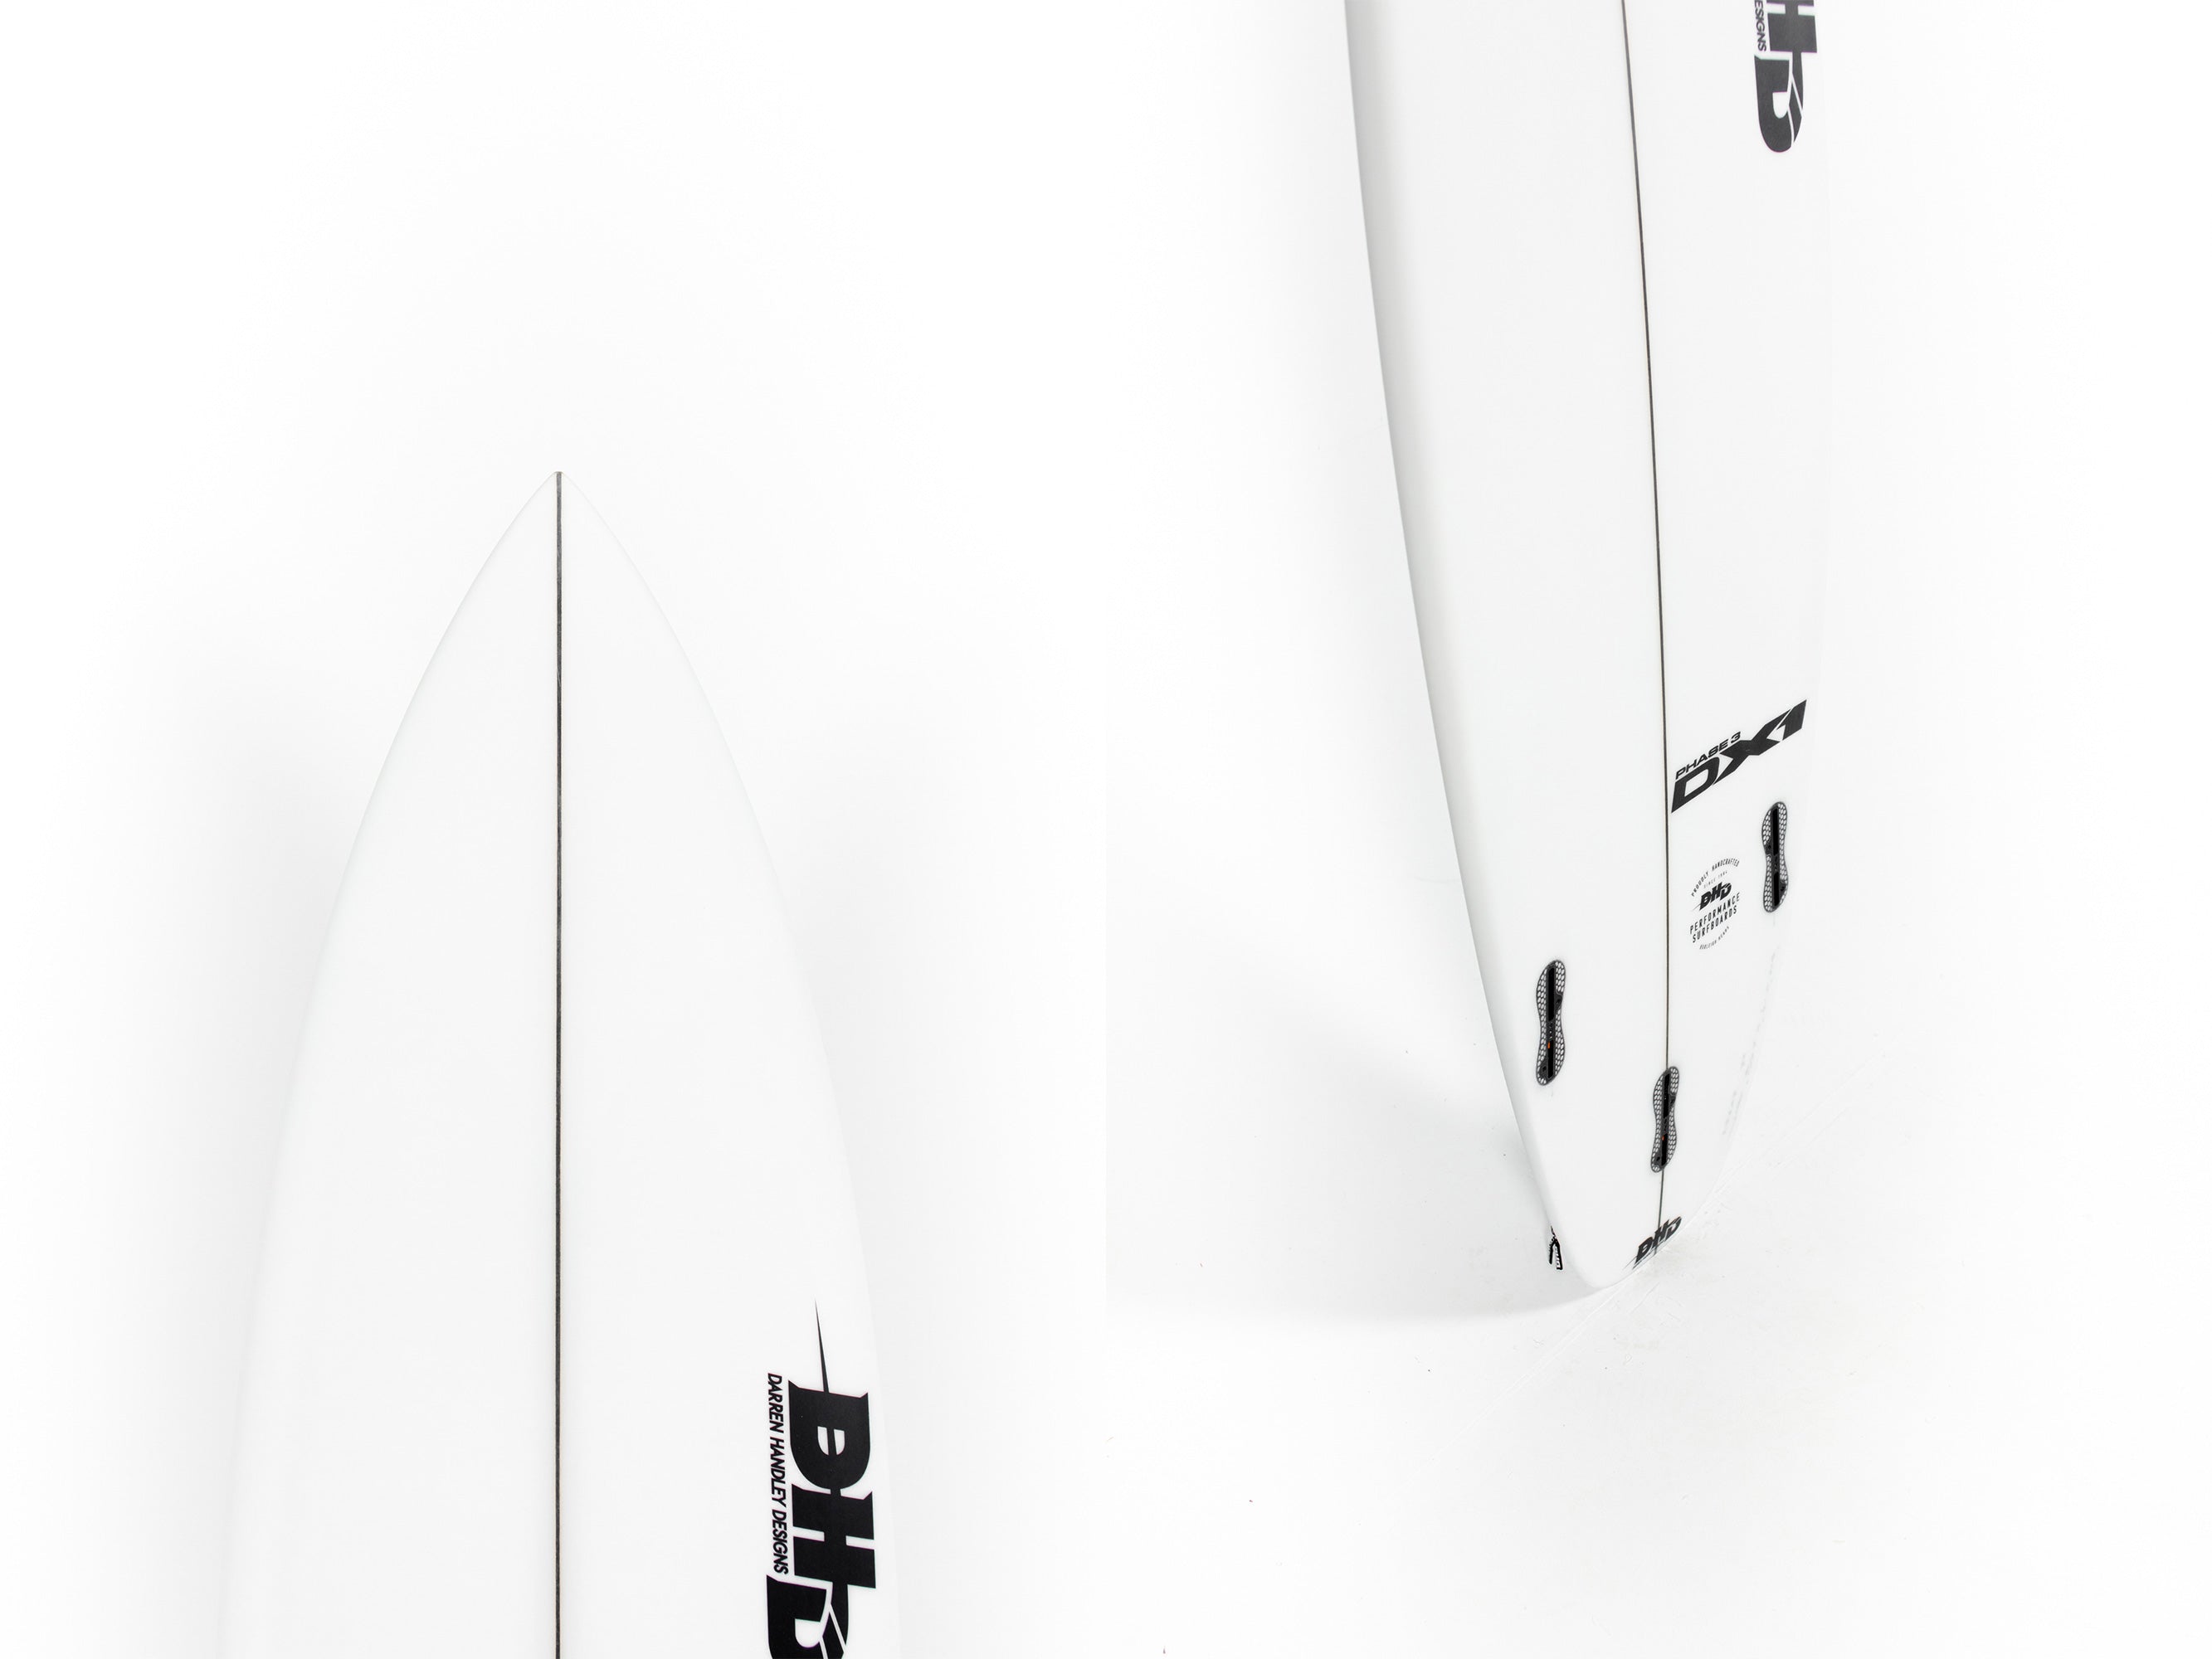 Pukas Surf Shop DHD Surfboards DX1 PHASE 3